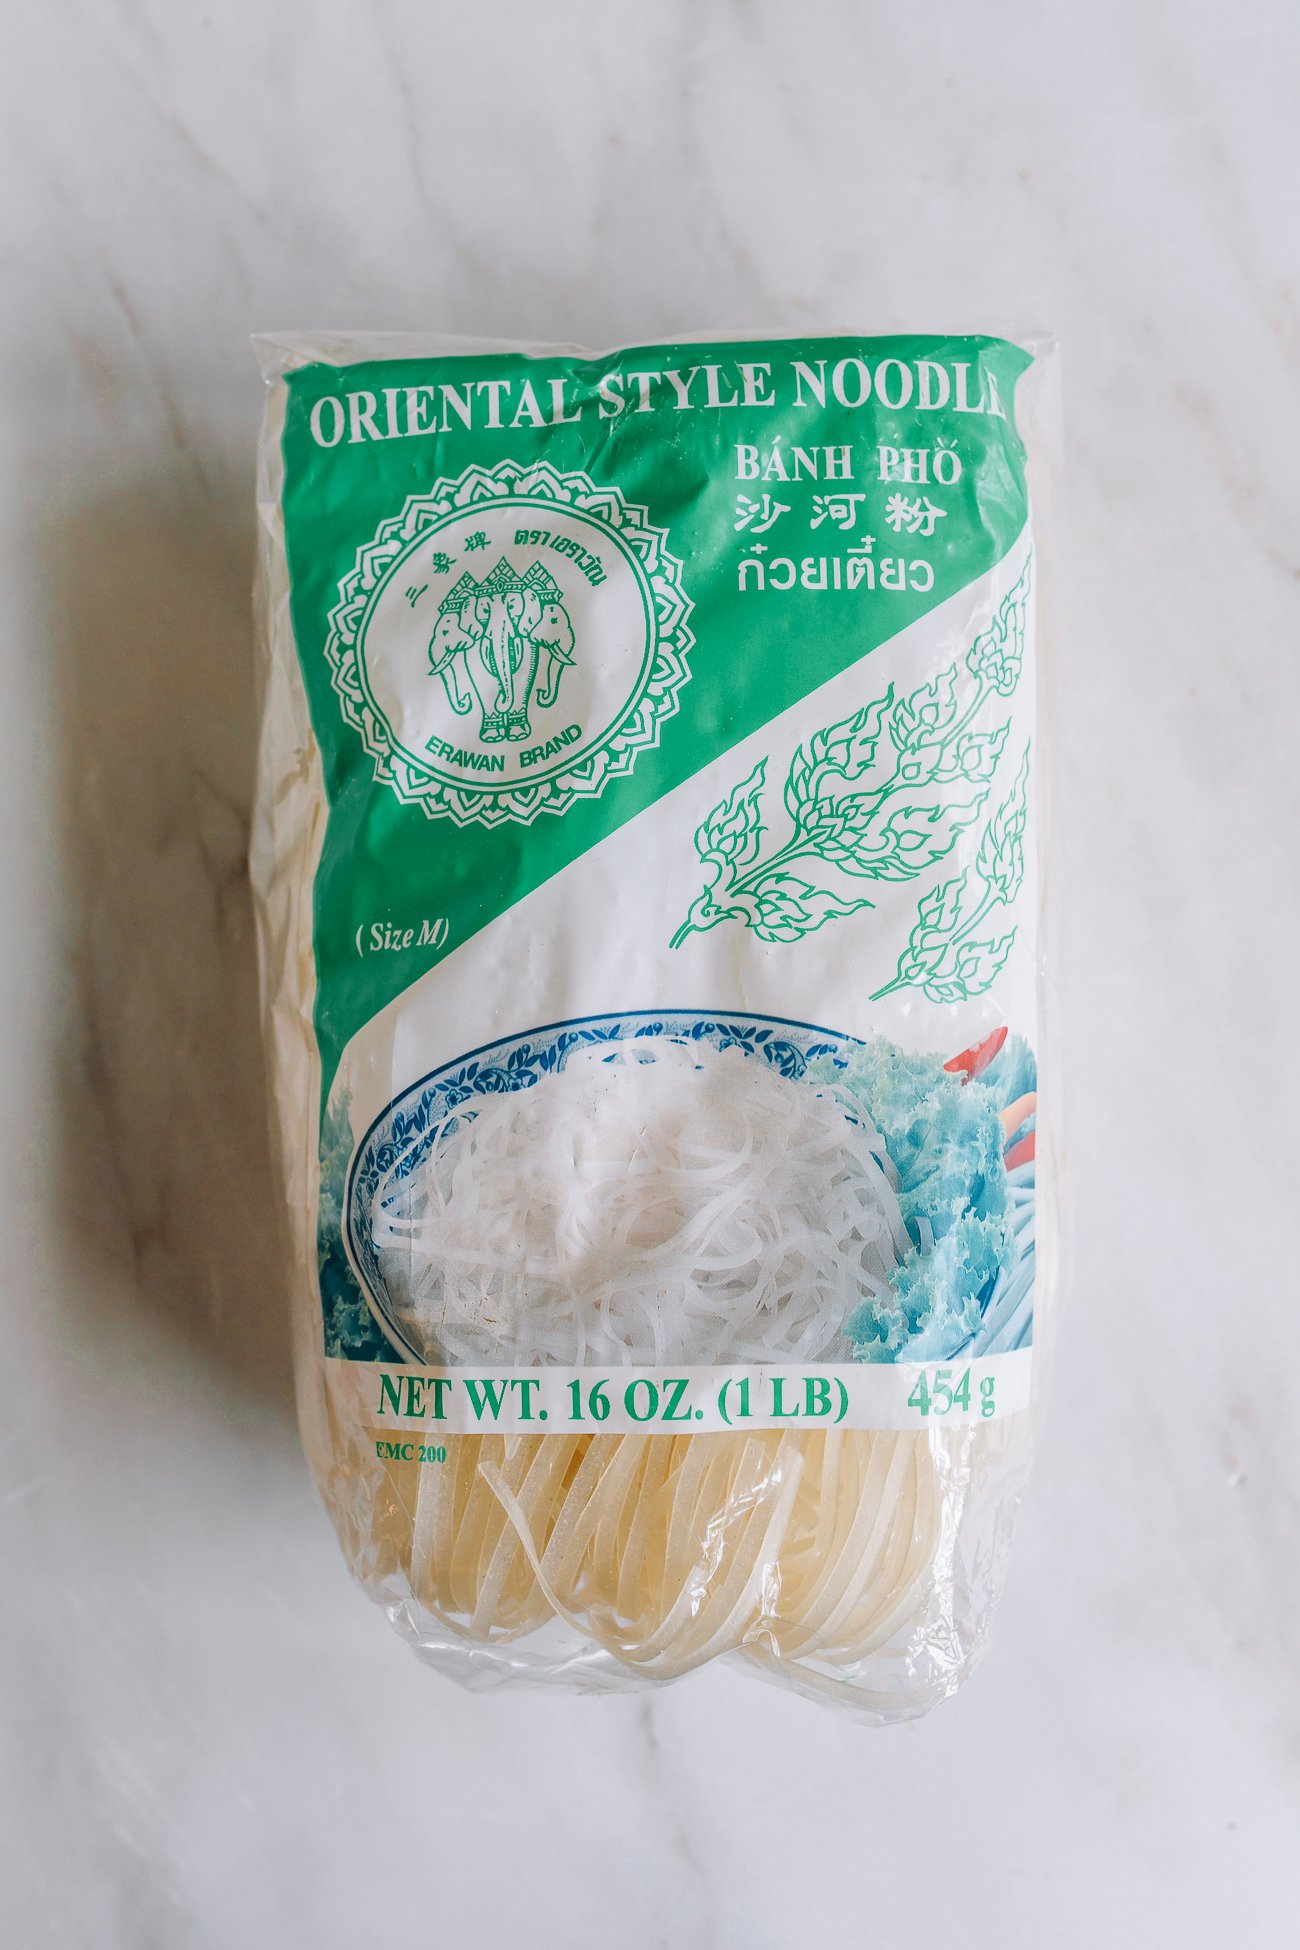 Rice Noodles for Pad Thai